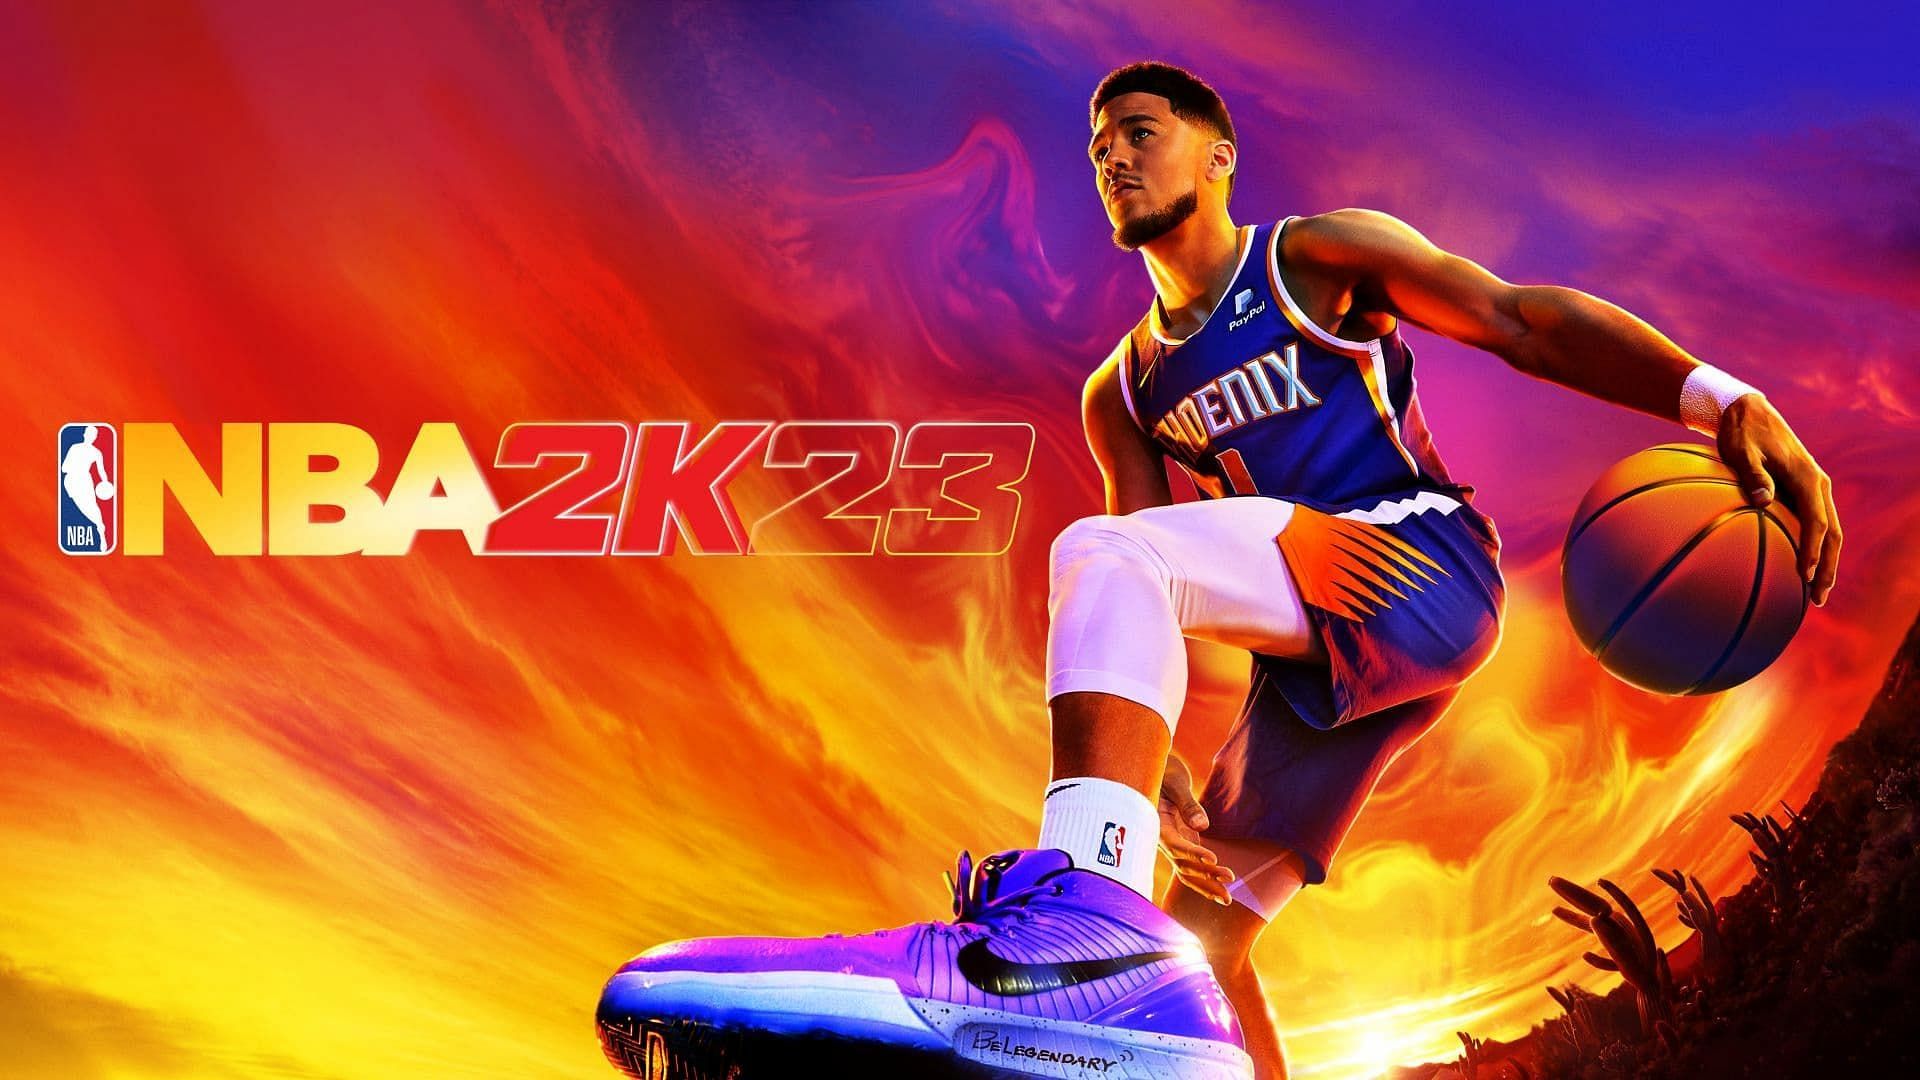 NBA 2k23 and four other titles that can run with 4 GB RAM in 2023 (Image via 2k Games)